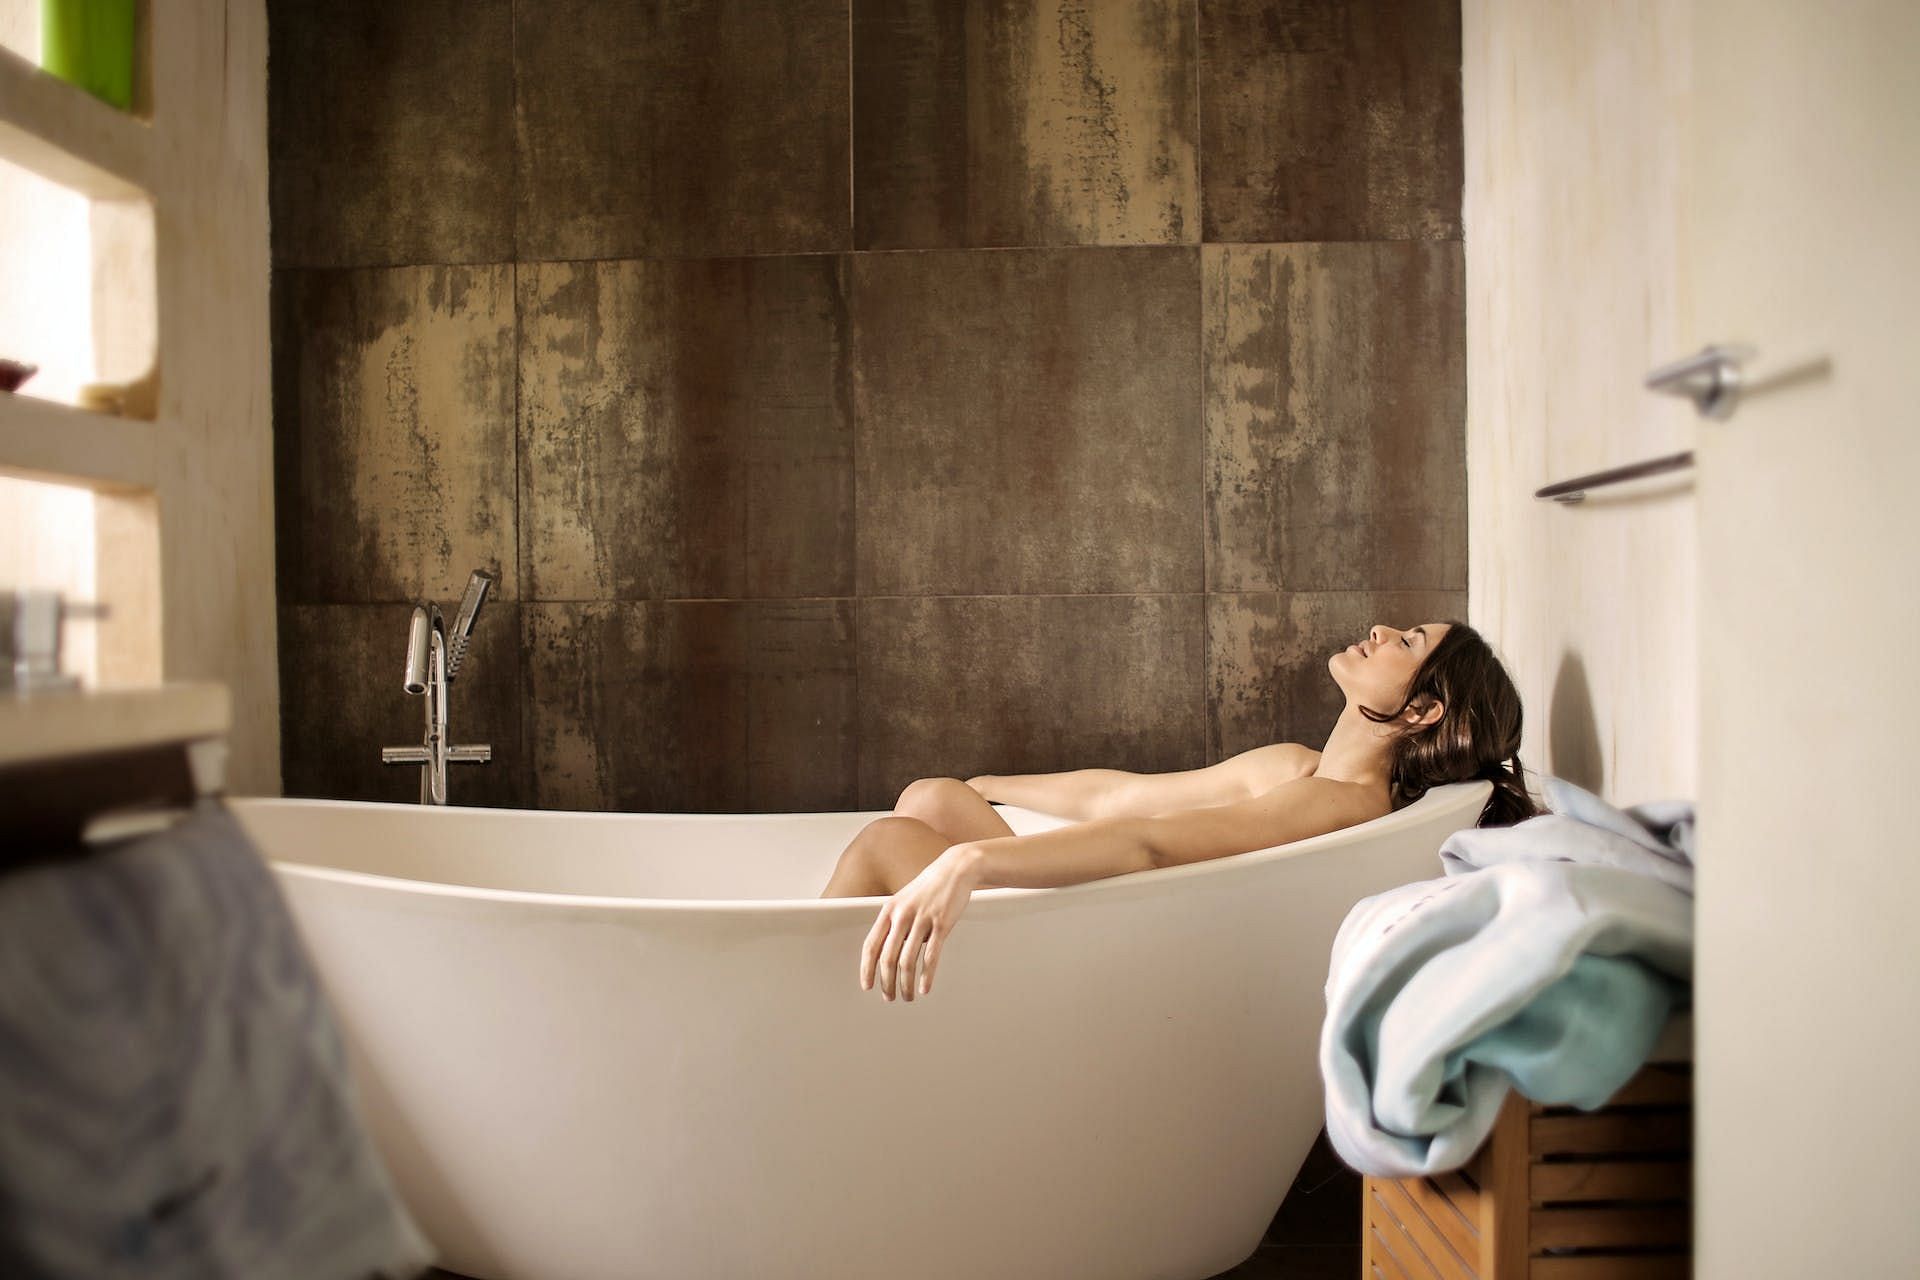 A shower can help you relax (Image via Pexels/Andrea Piacquadio)